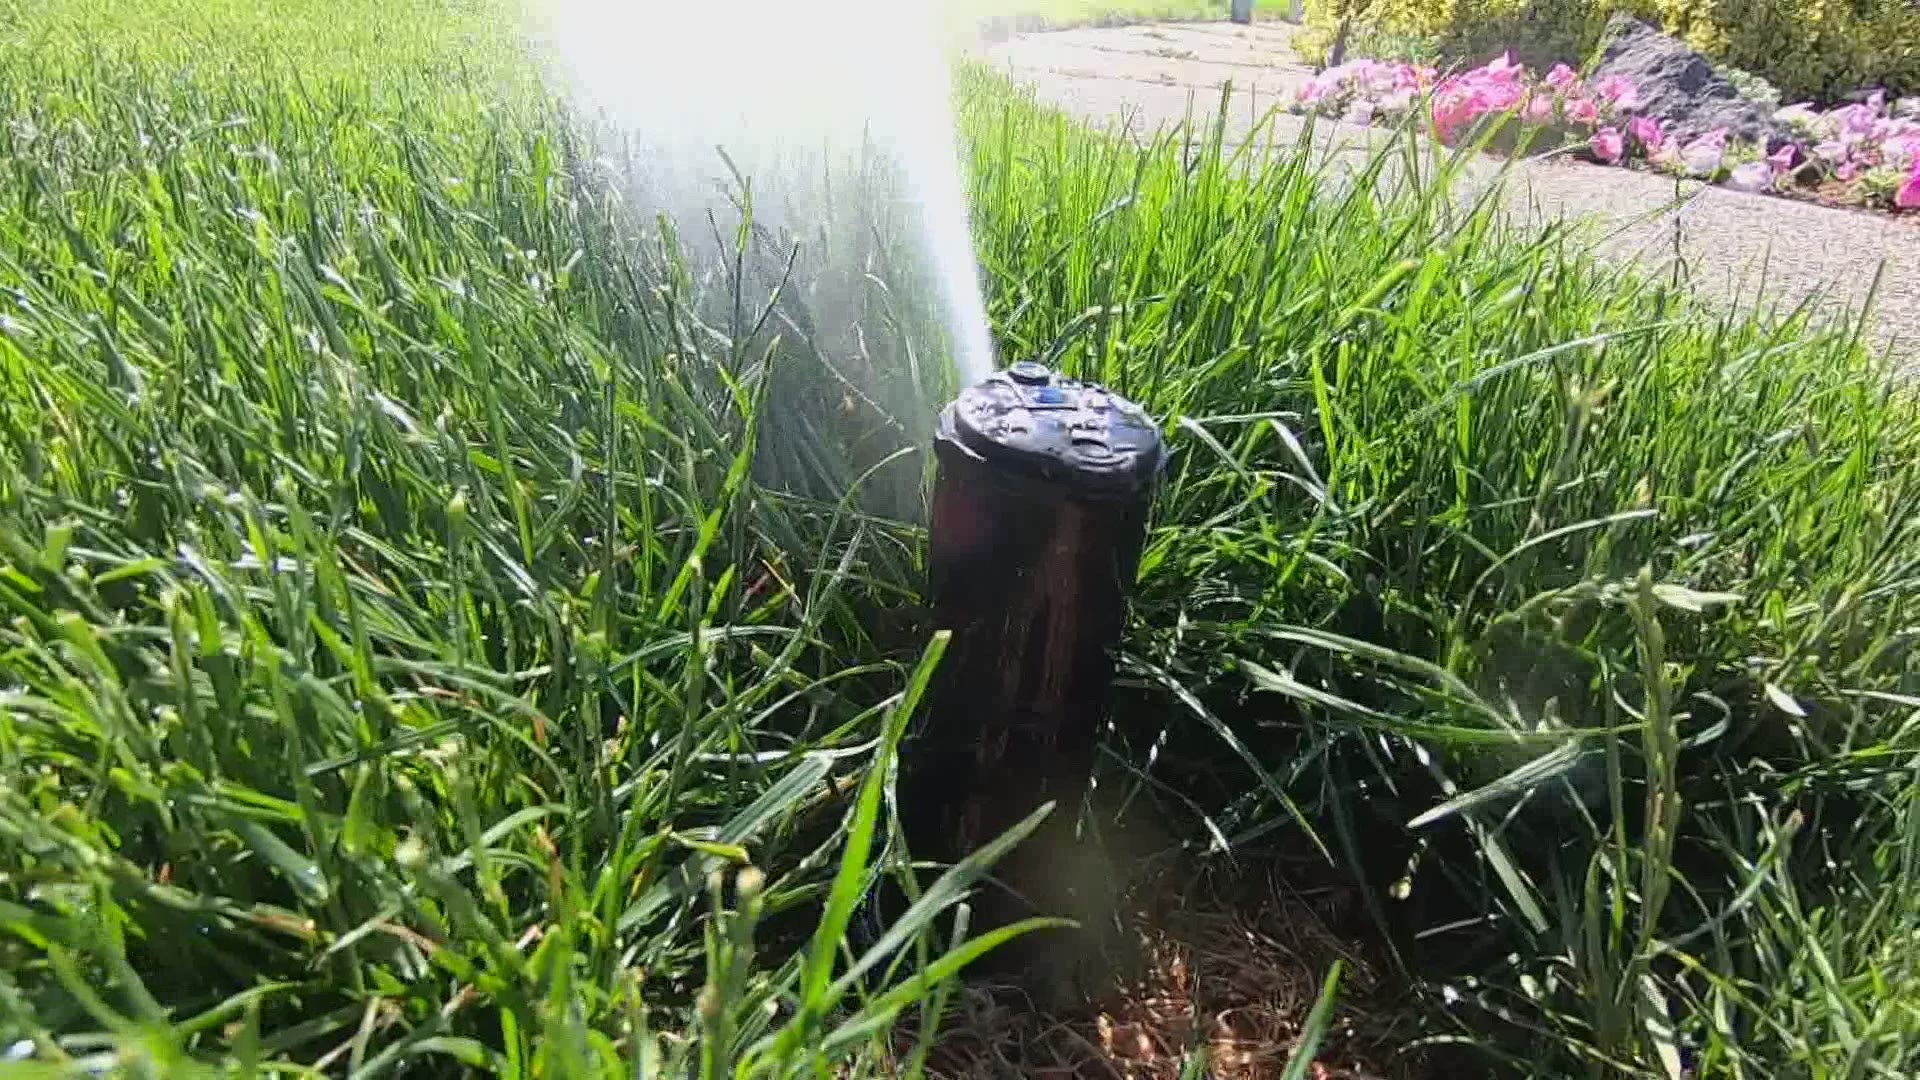 Gardening expert Ciscoe Morris recommends watering your lawn with 1 inch of water per week to keep it green throughout summer.